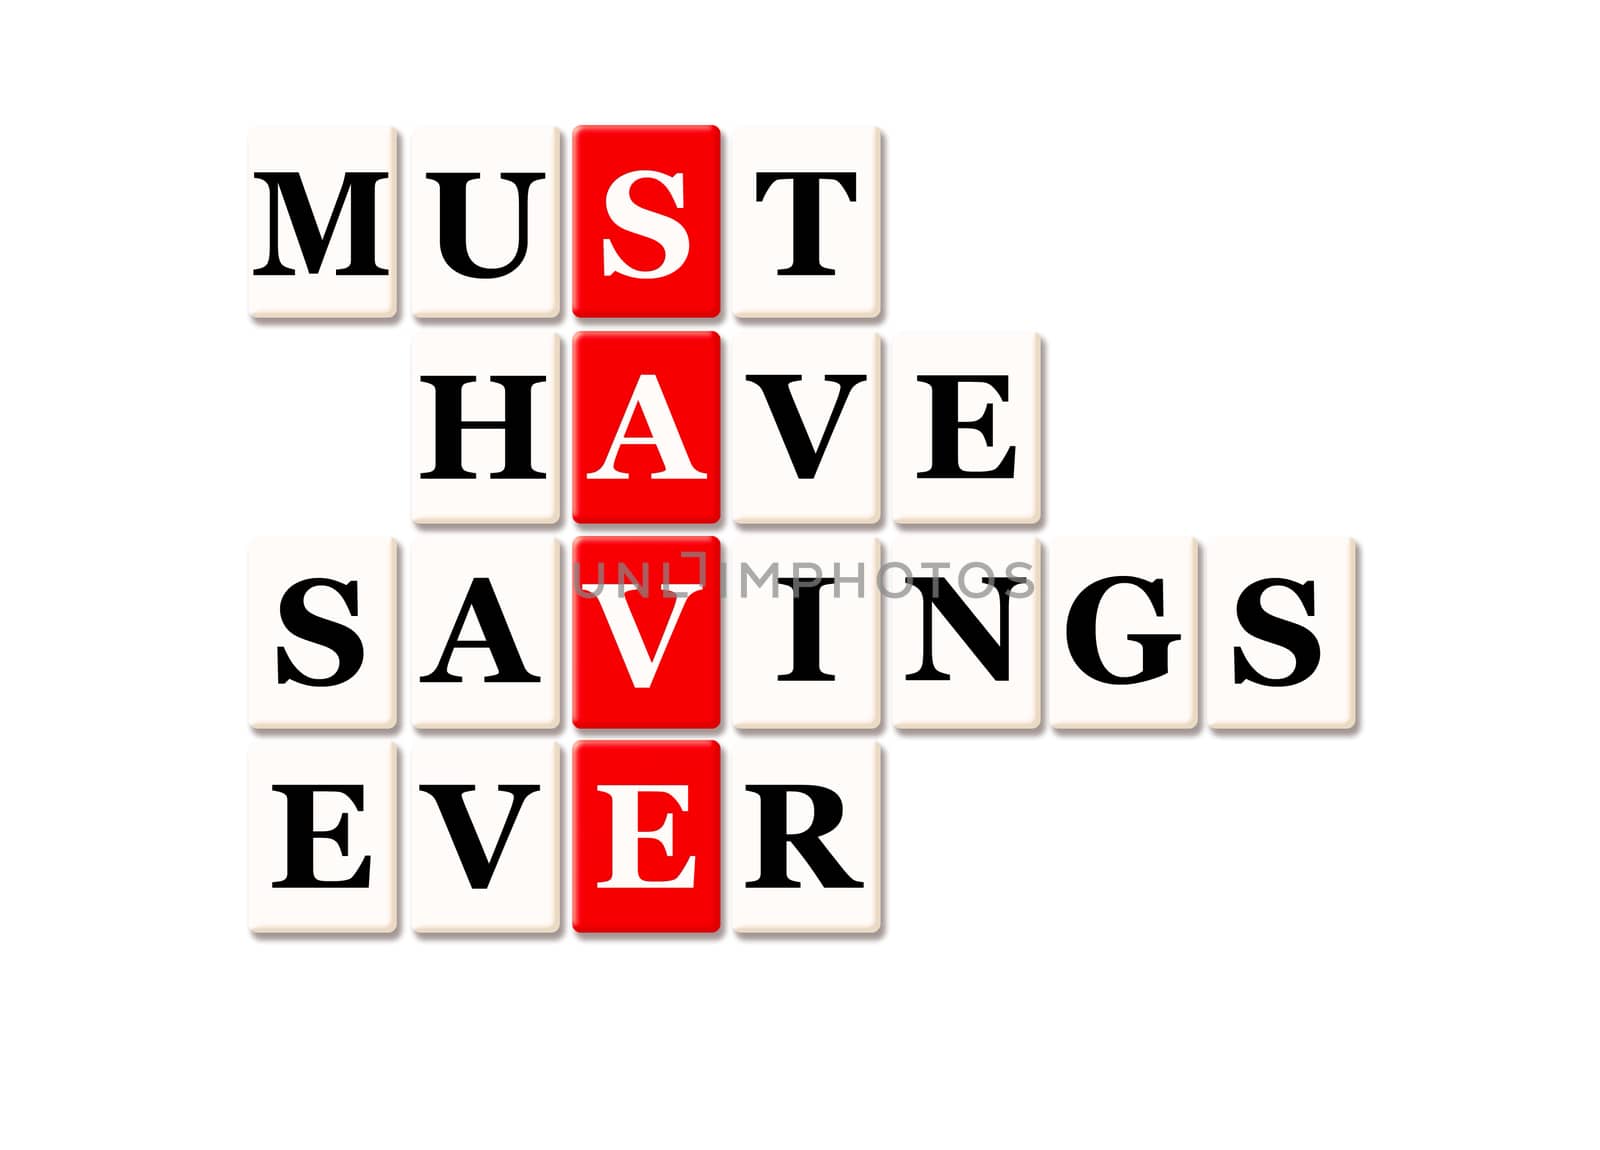 Acronym of Save by ivosar